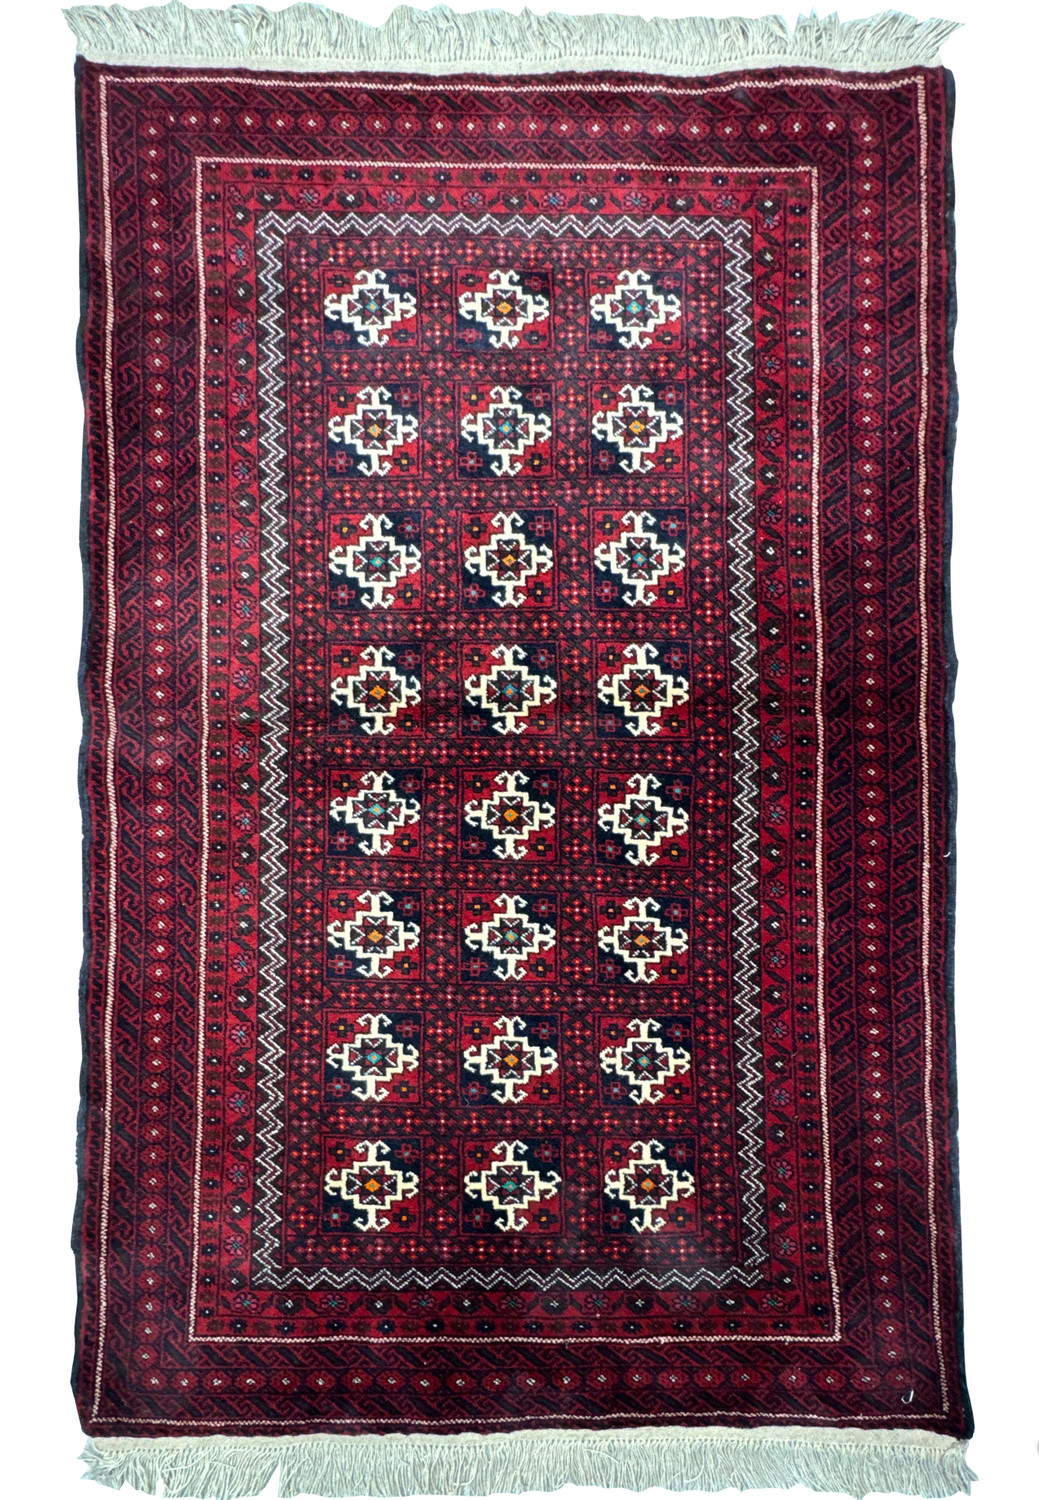 Antique Persian Baluch rug with dark red background and geometric diamond lattice pattern featuring navy blue, white, and orange accents